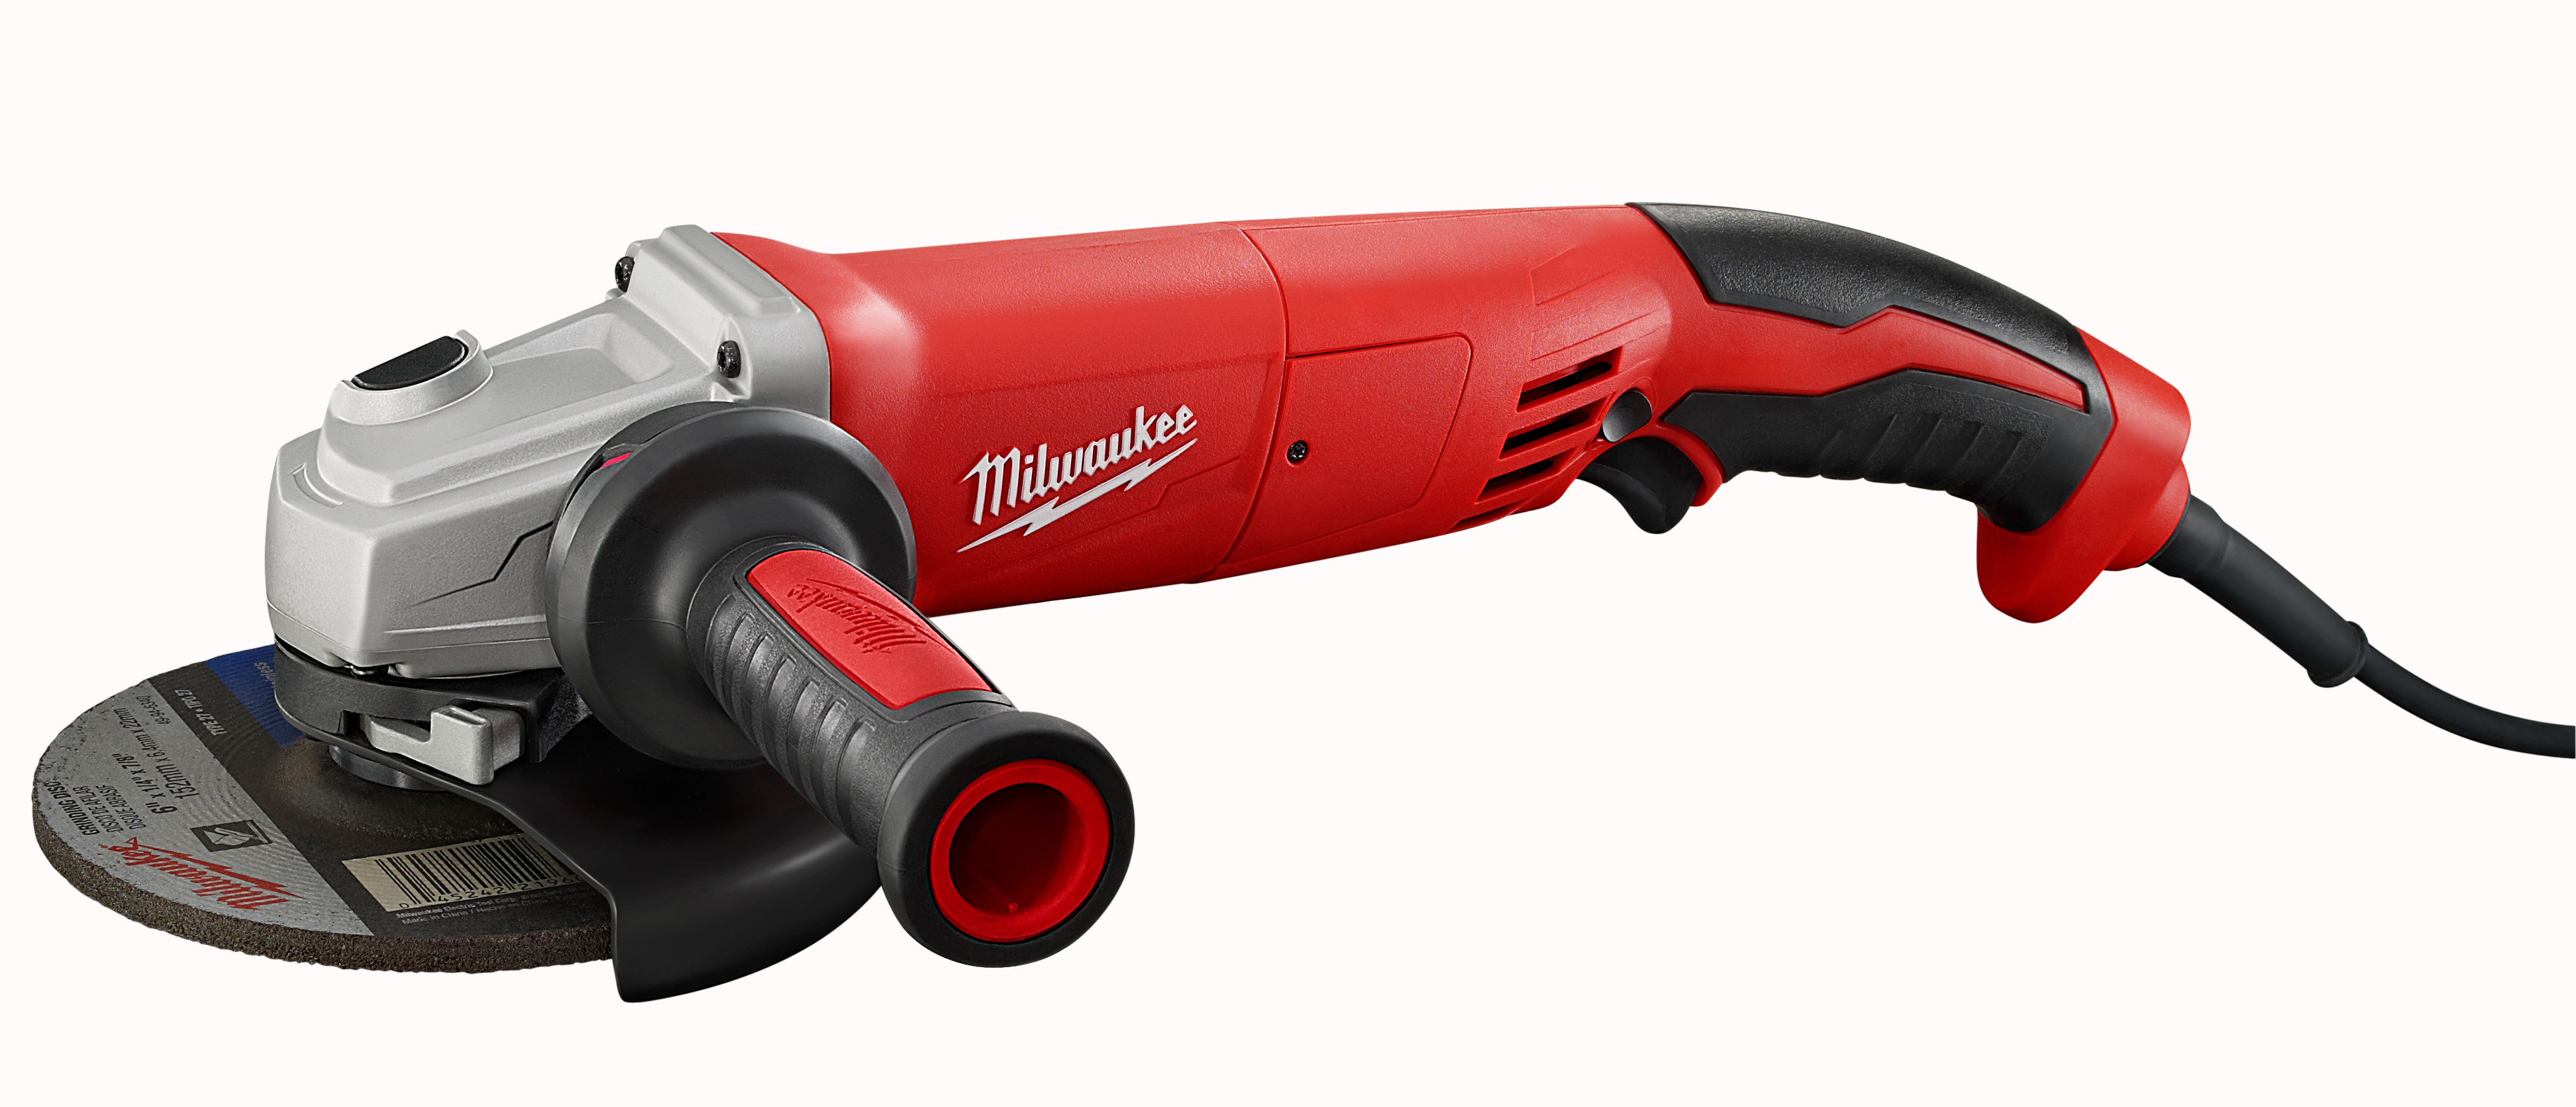 Milwaukee® 6124-30 Double Insulated Small Angle Grinder, 5 in Dia Wheel, 5/8-11 Arbor/Shank, 120 VAC, Black/Red